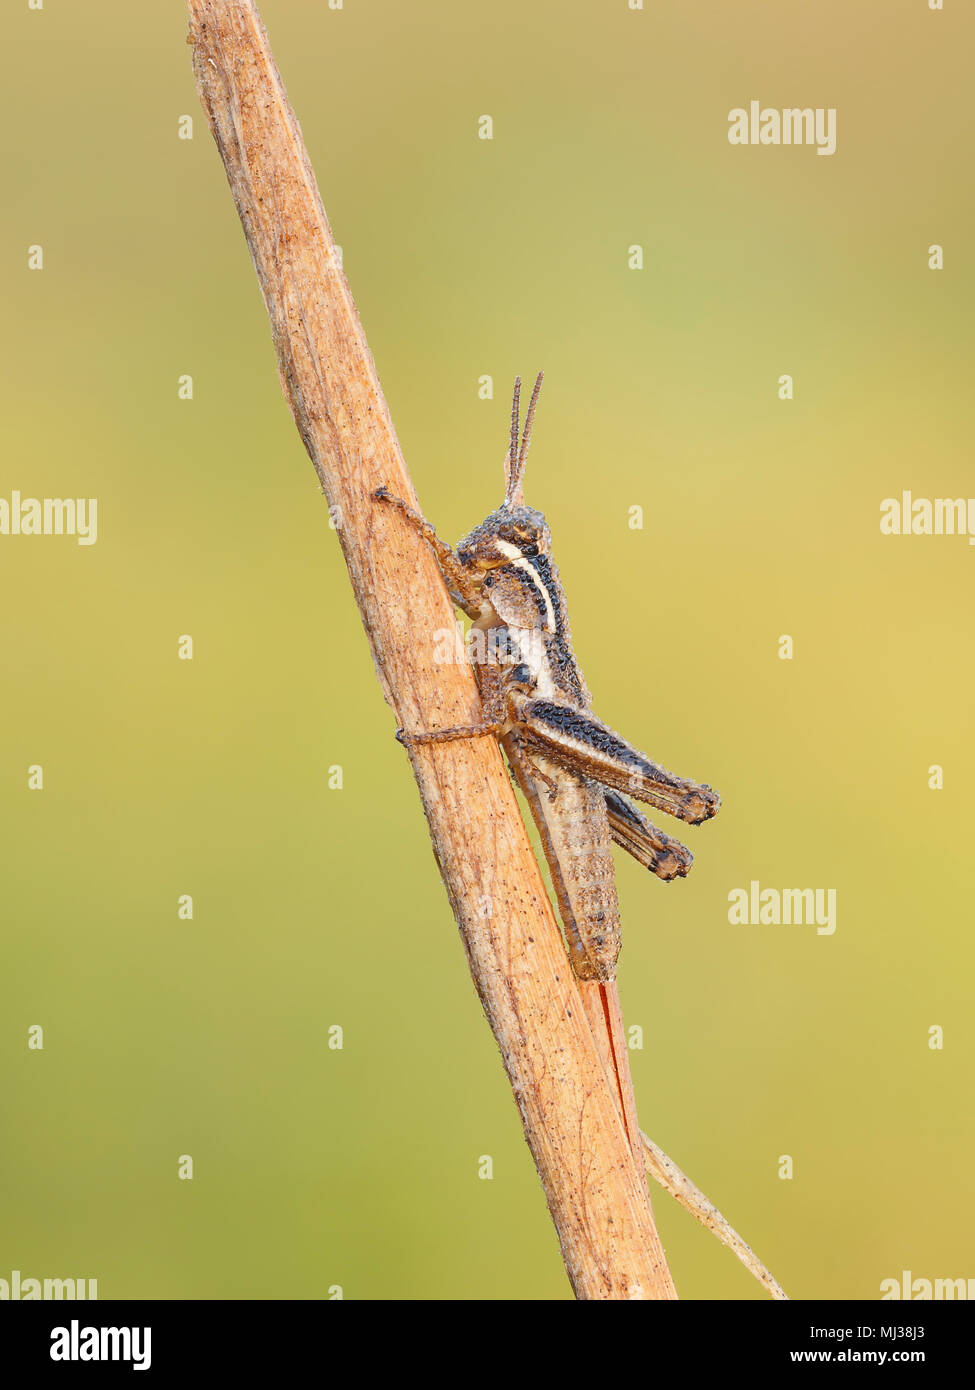 A dew-covered Spur-throated Grasshopper (Paroxya sp.) nymph perches on a plant stem in the cool air of early morning. Stock Photo